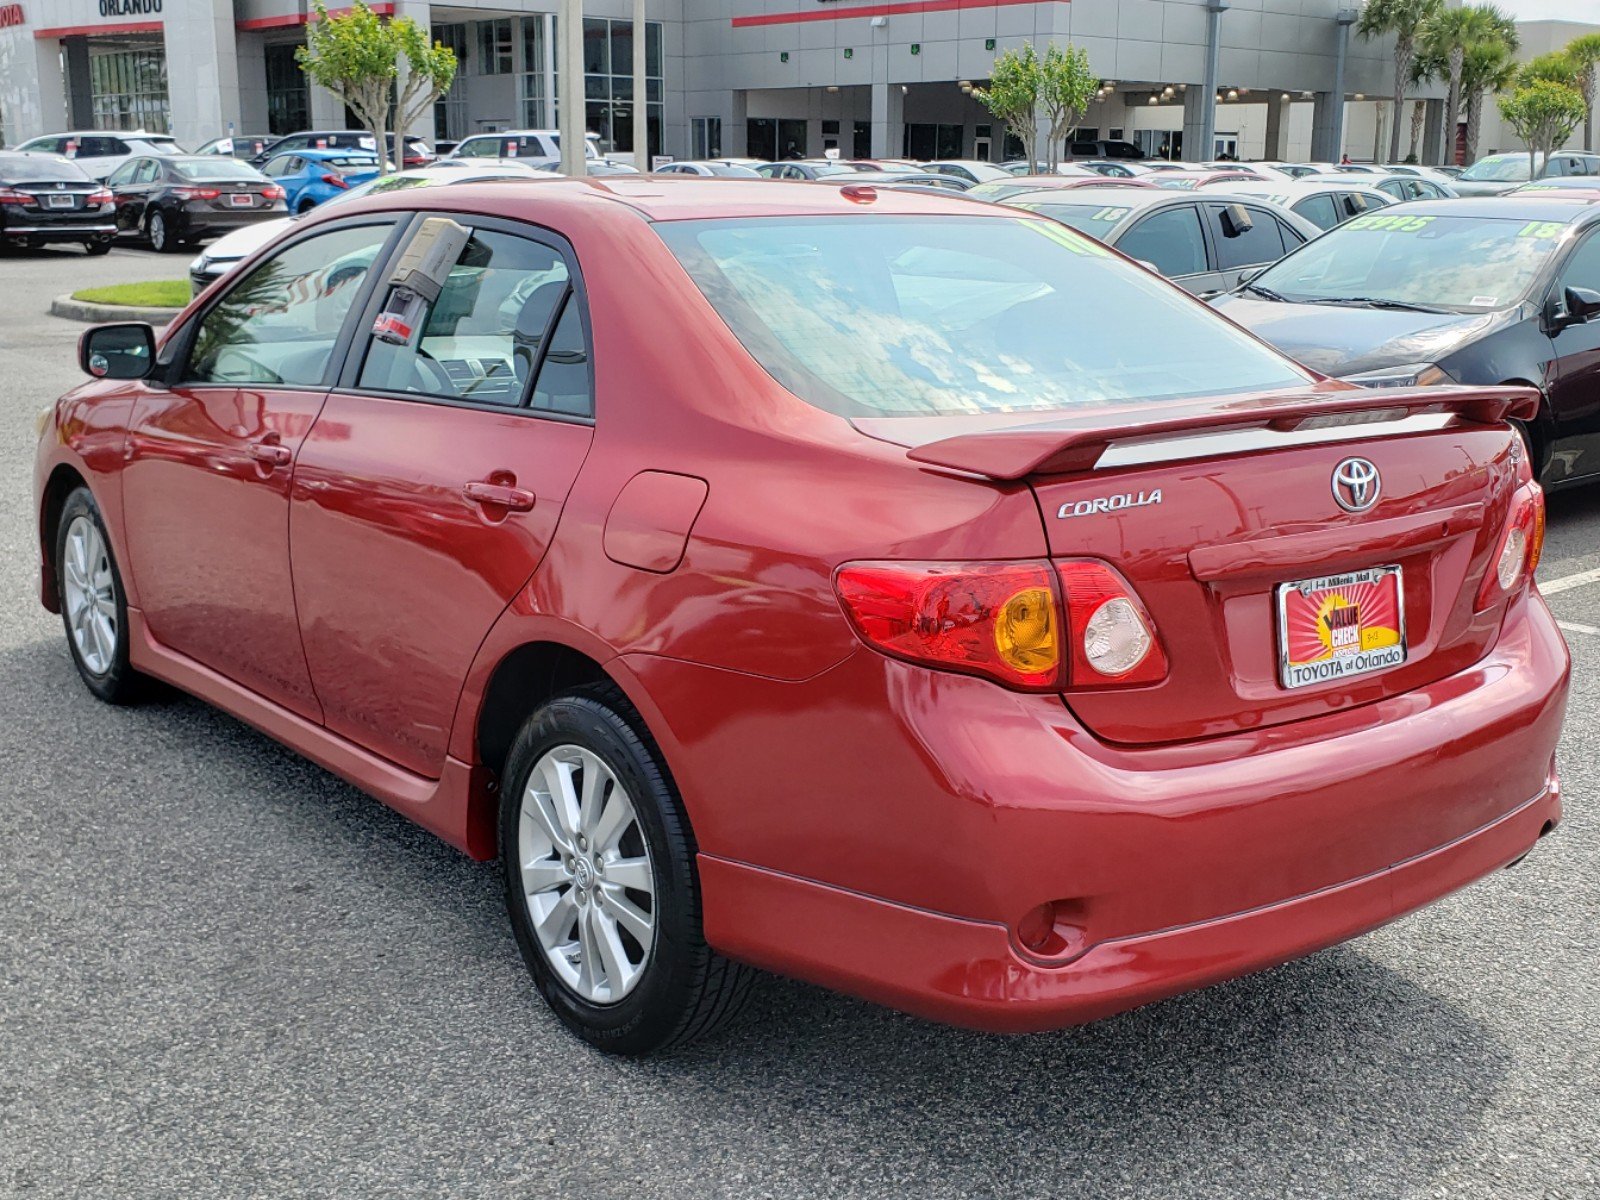 Pre-Owned 2010 Toyota Corolla S 4dr Car in Orlando #0440289A | Toyota ...